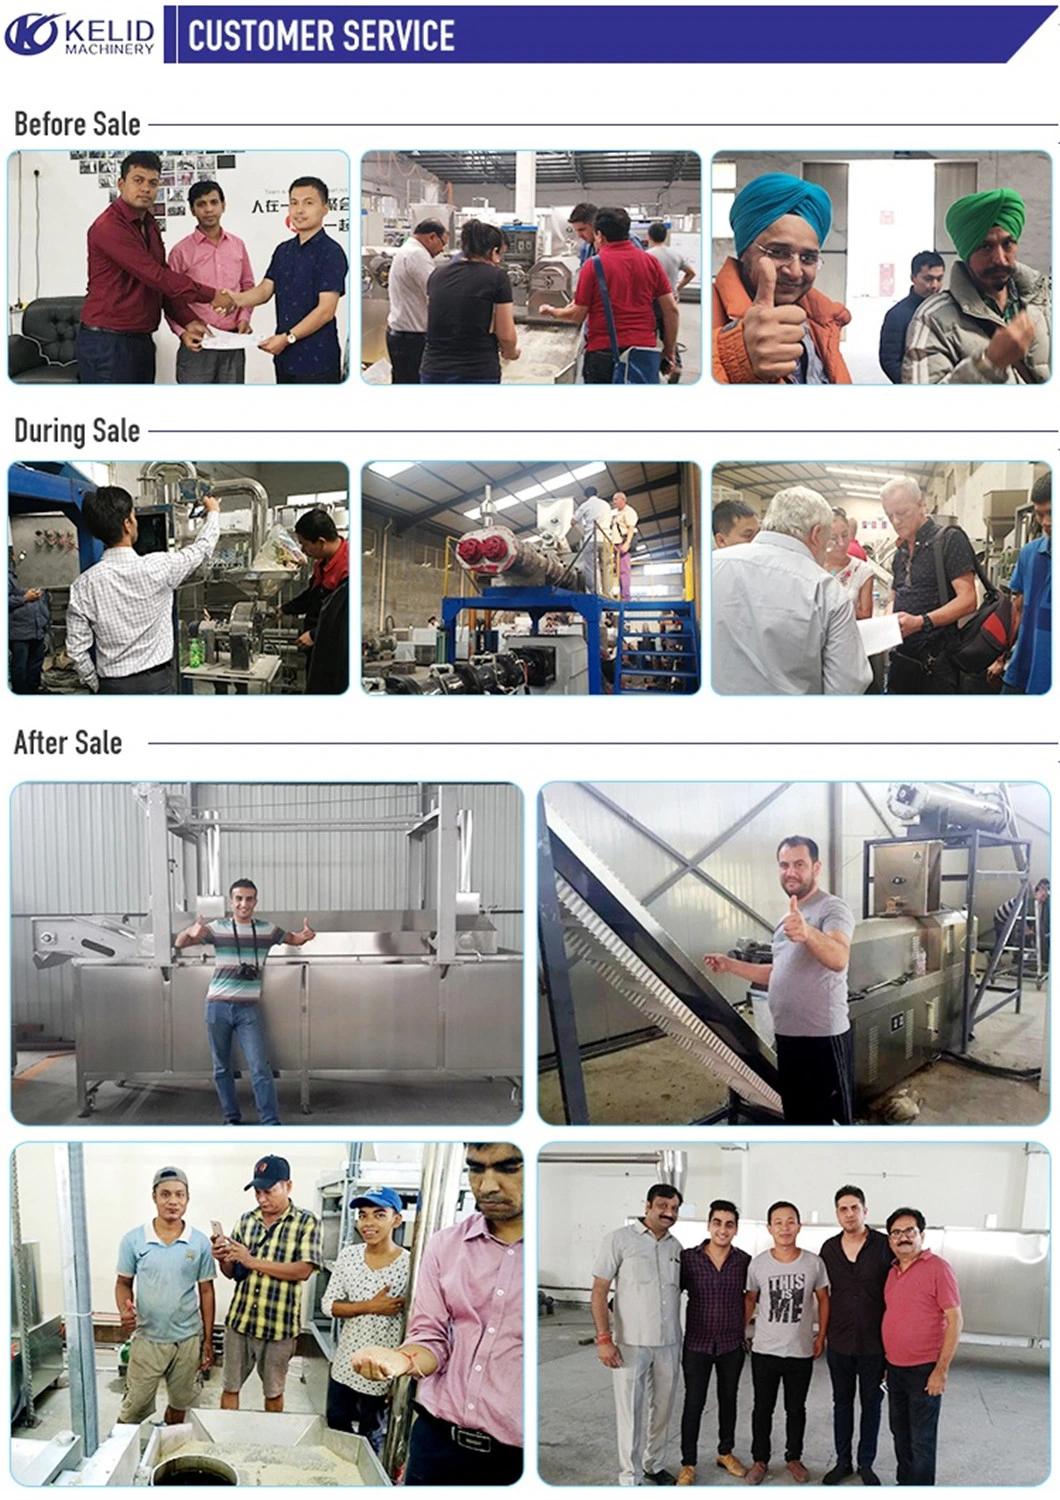 Fully Automatic Enriched Artificial Fortified Rice Kernel Production Line